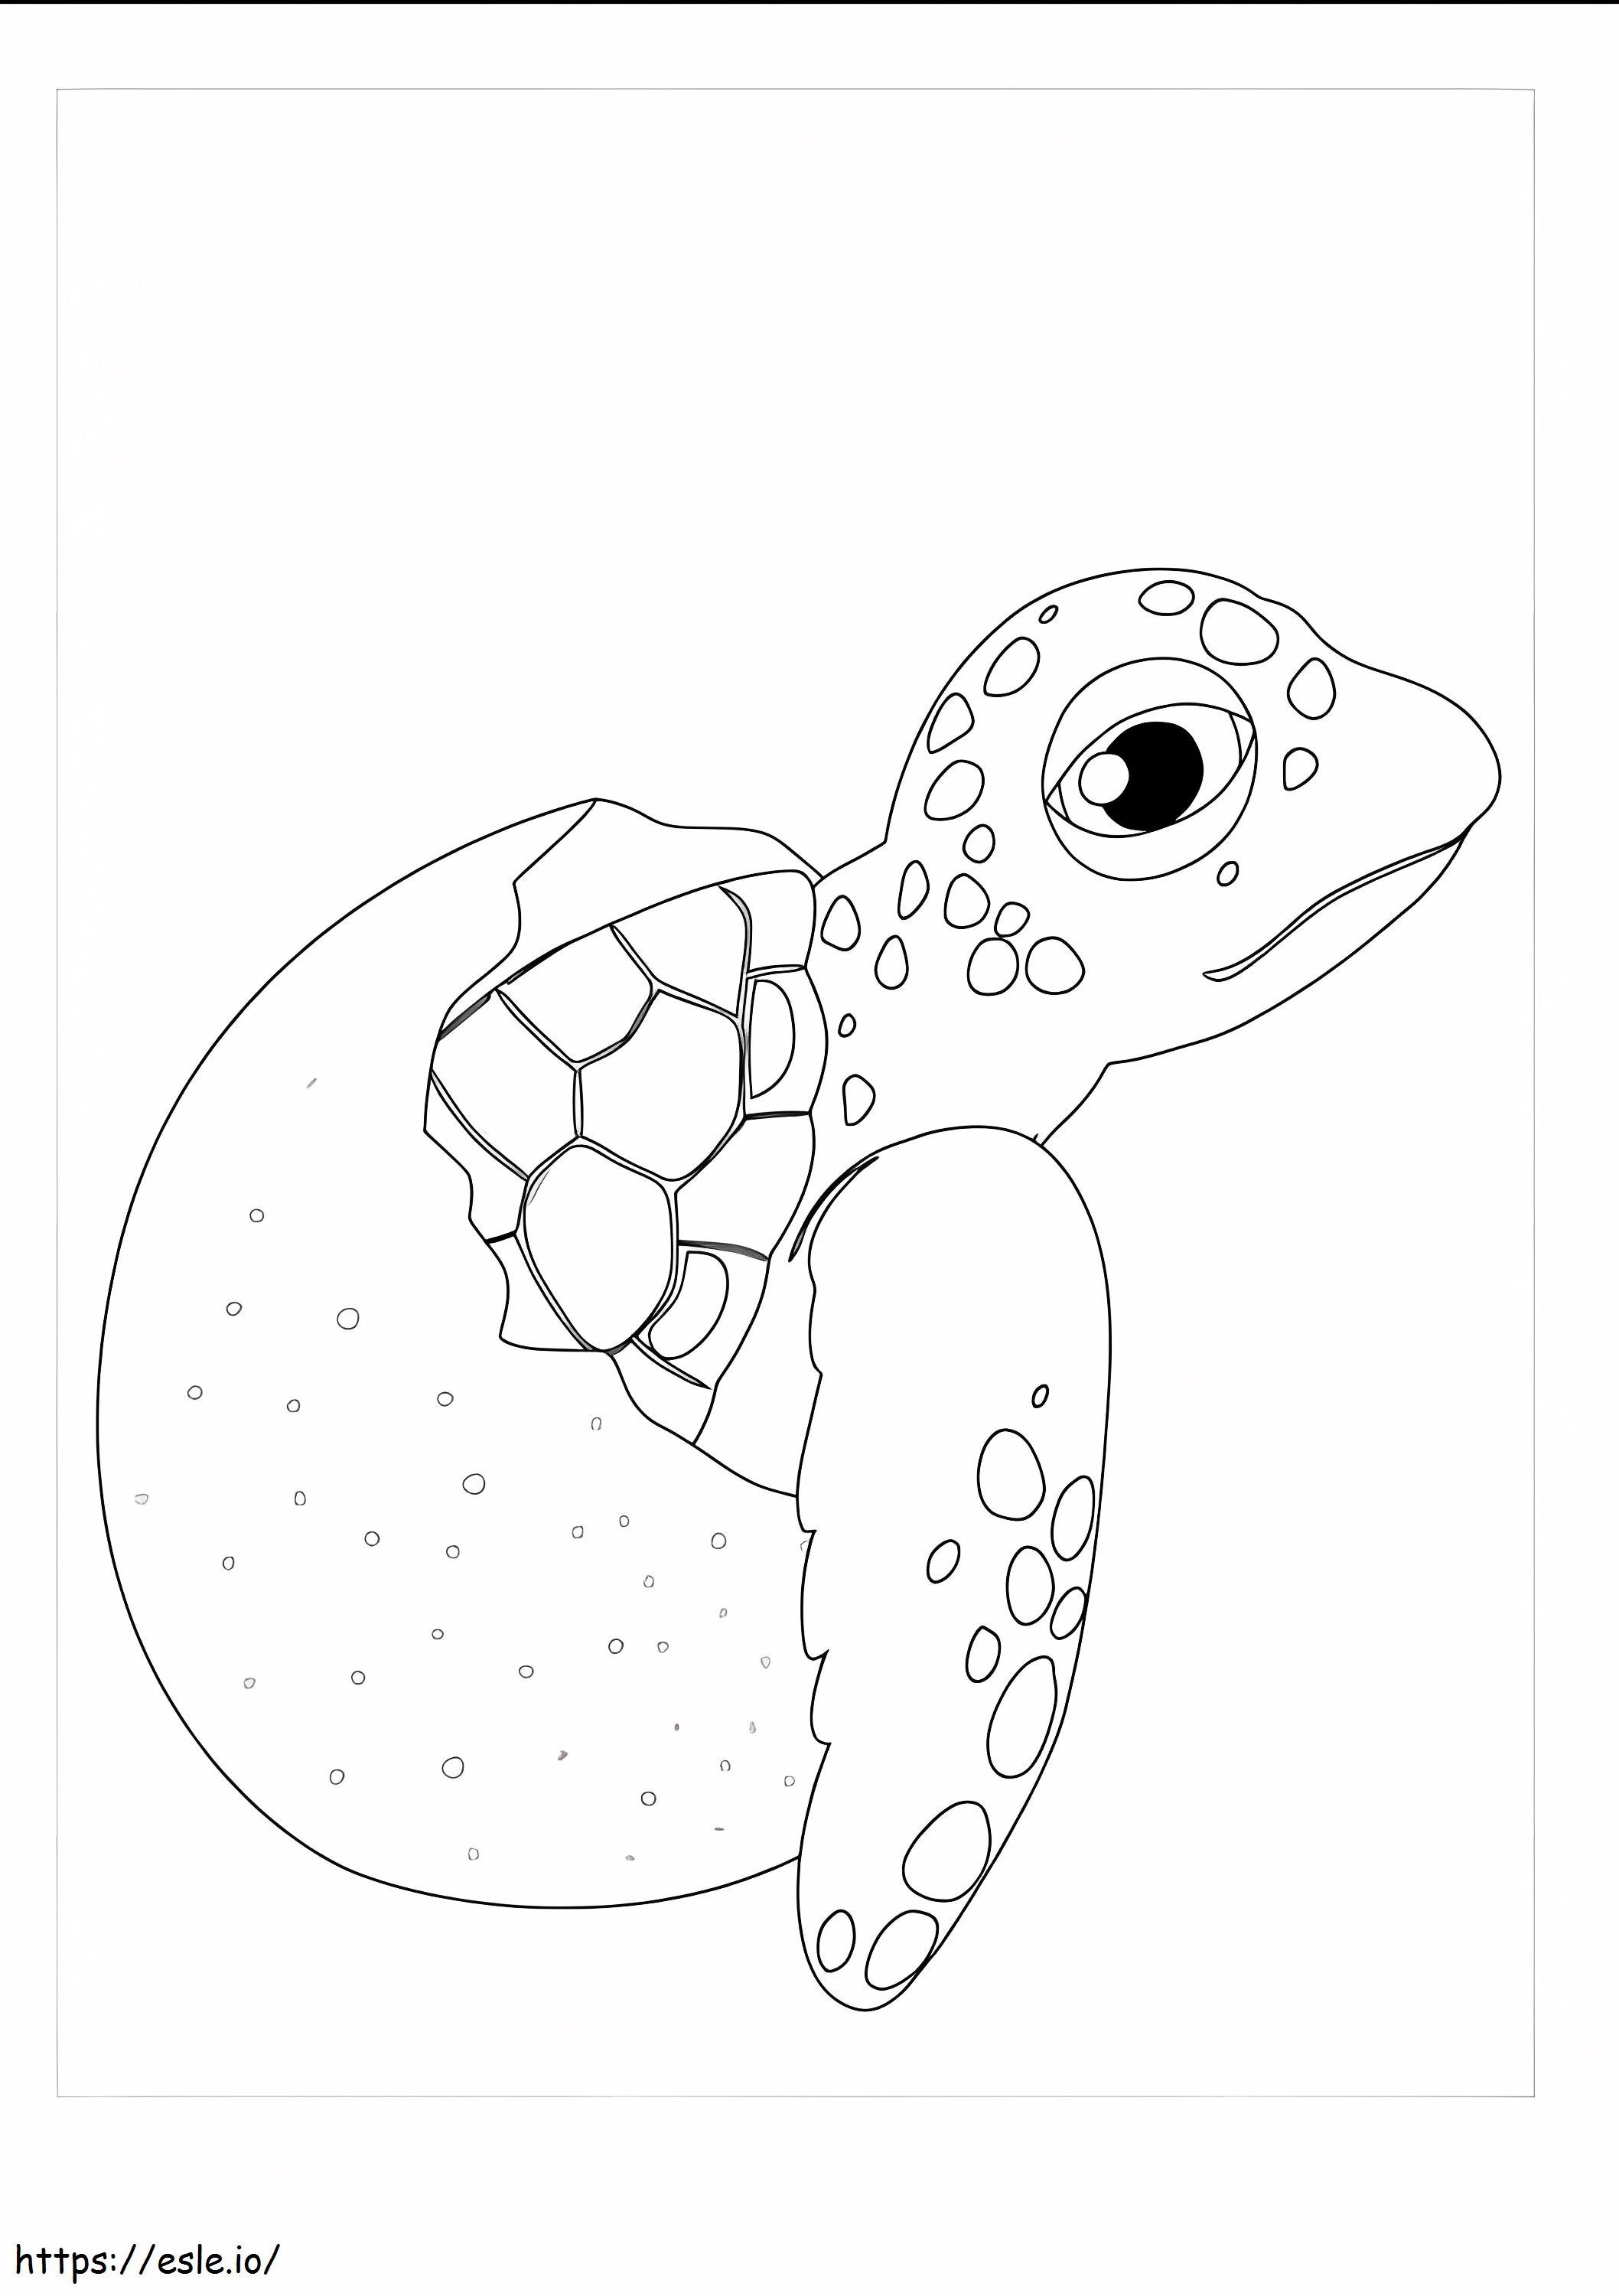 Turtle In Broken Egg coloring page